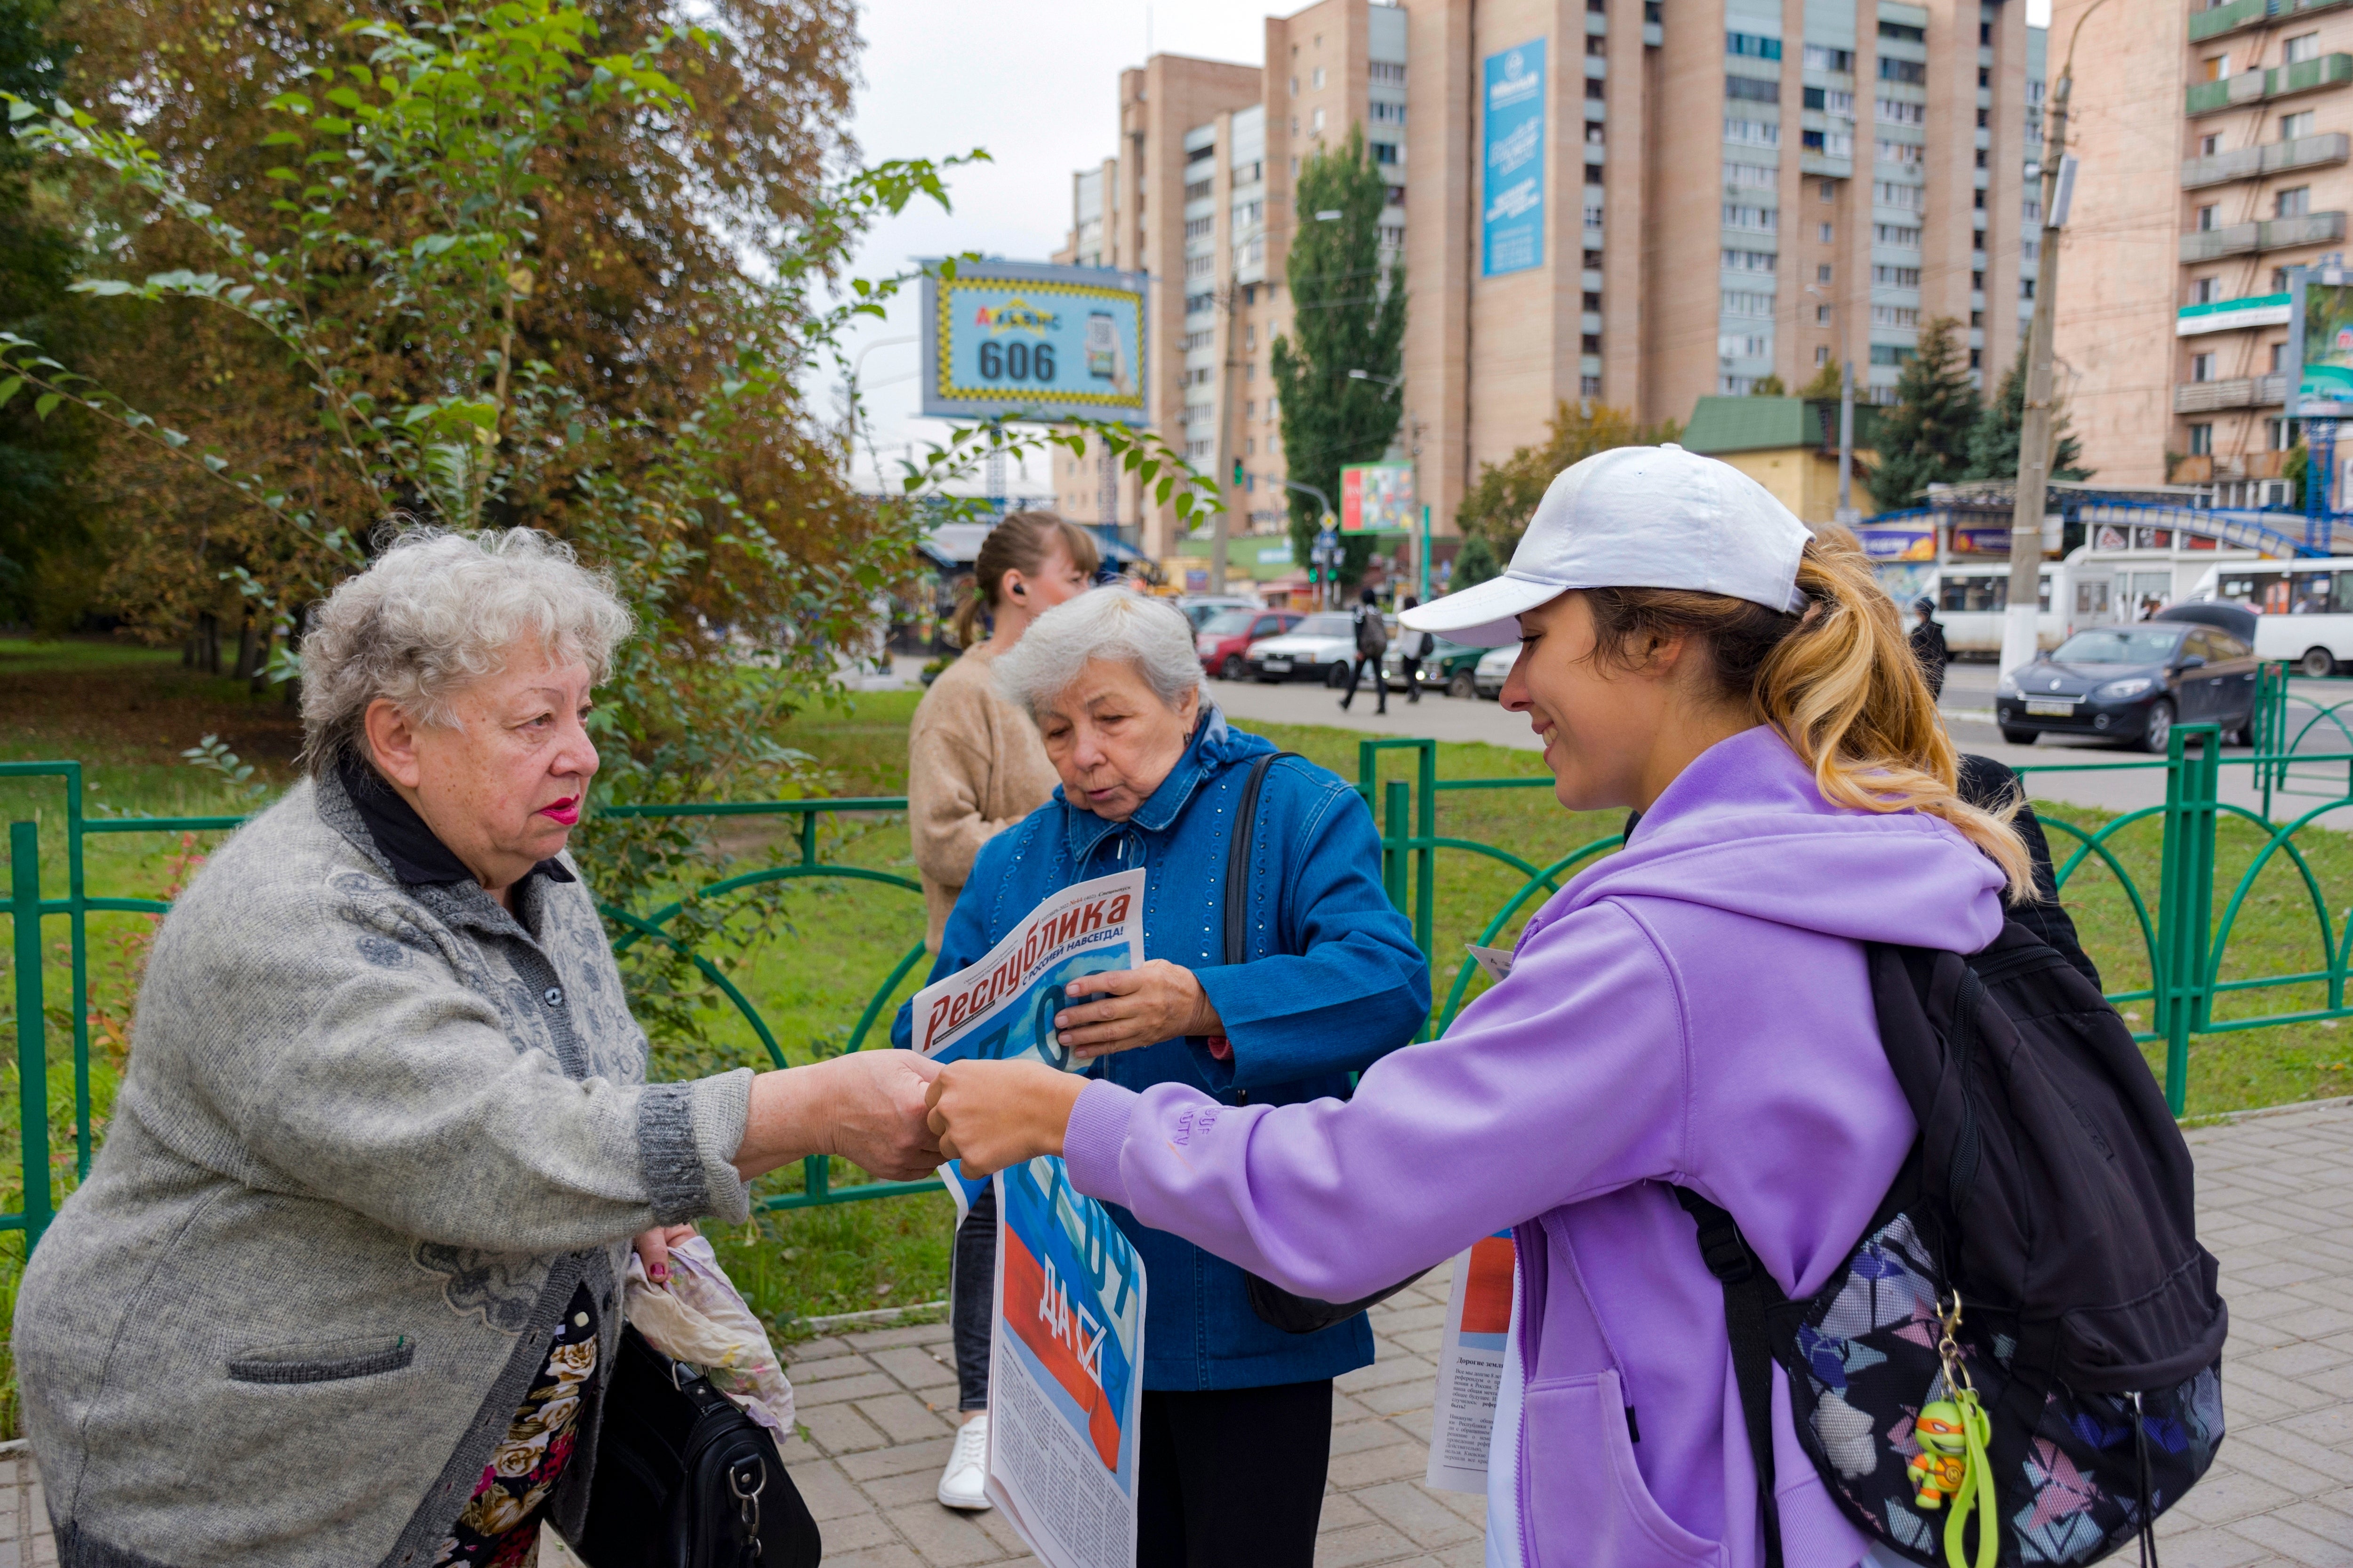 A volunteer for the Luhansk regional election commission, right, distributes newspapers to citizens prior to a referendum in Luhansk